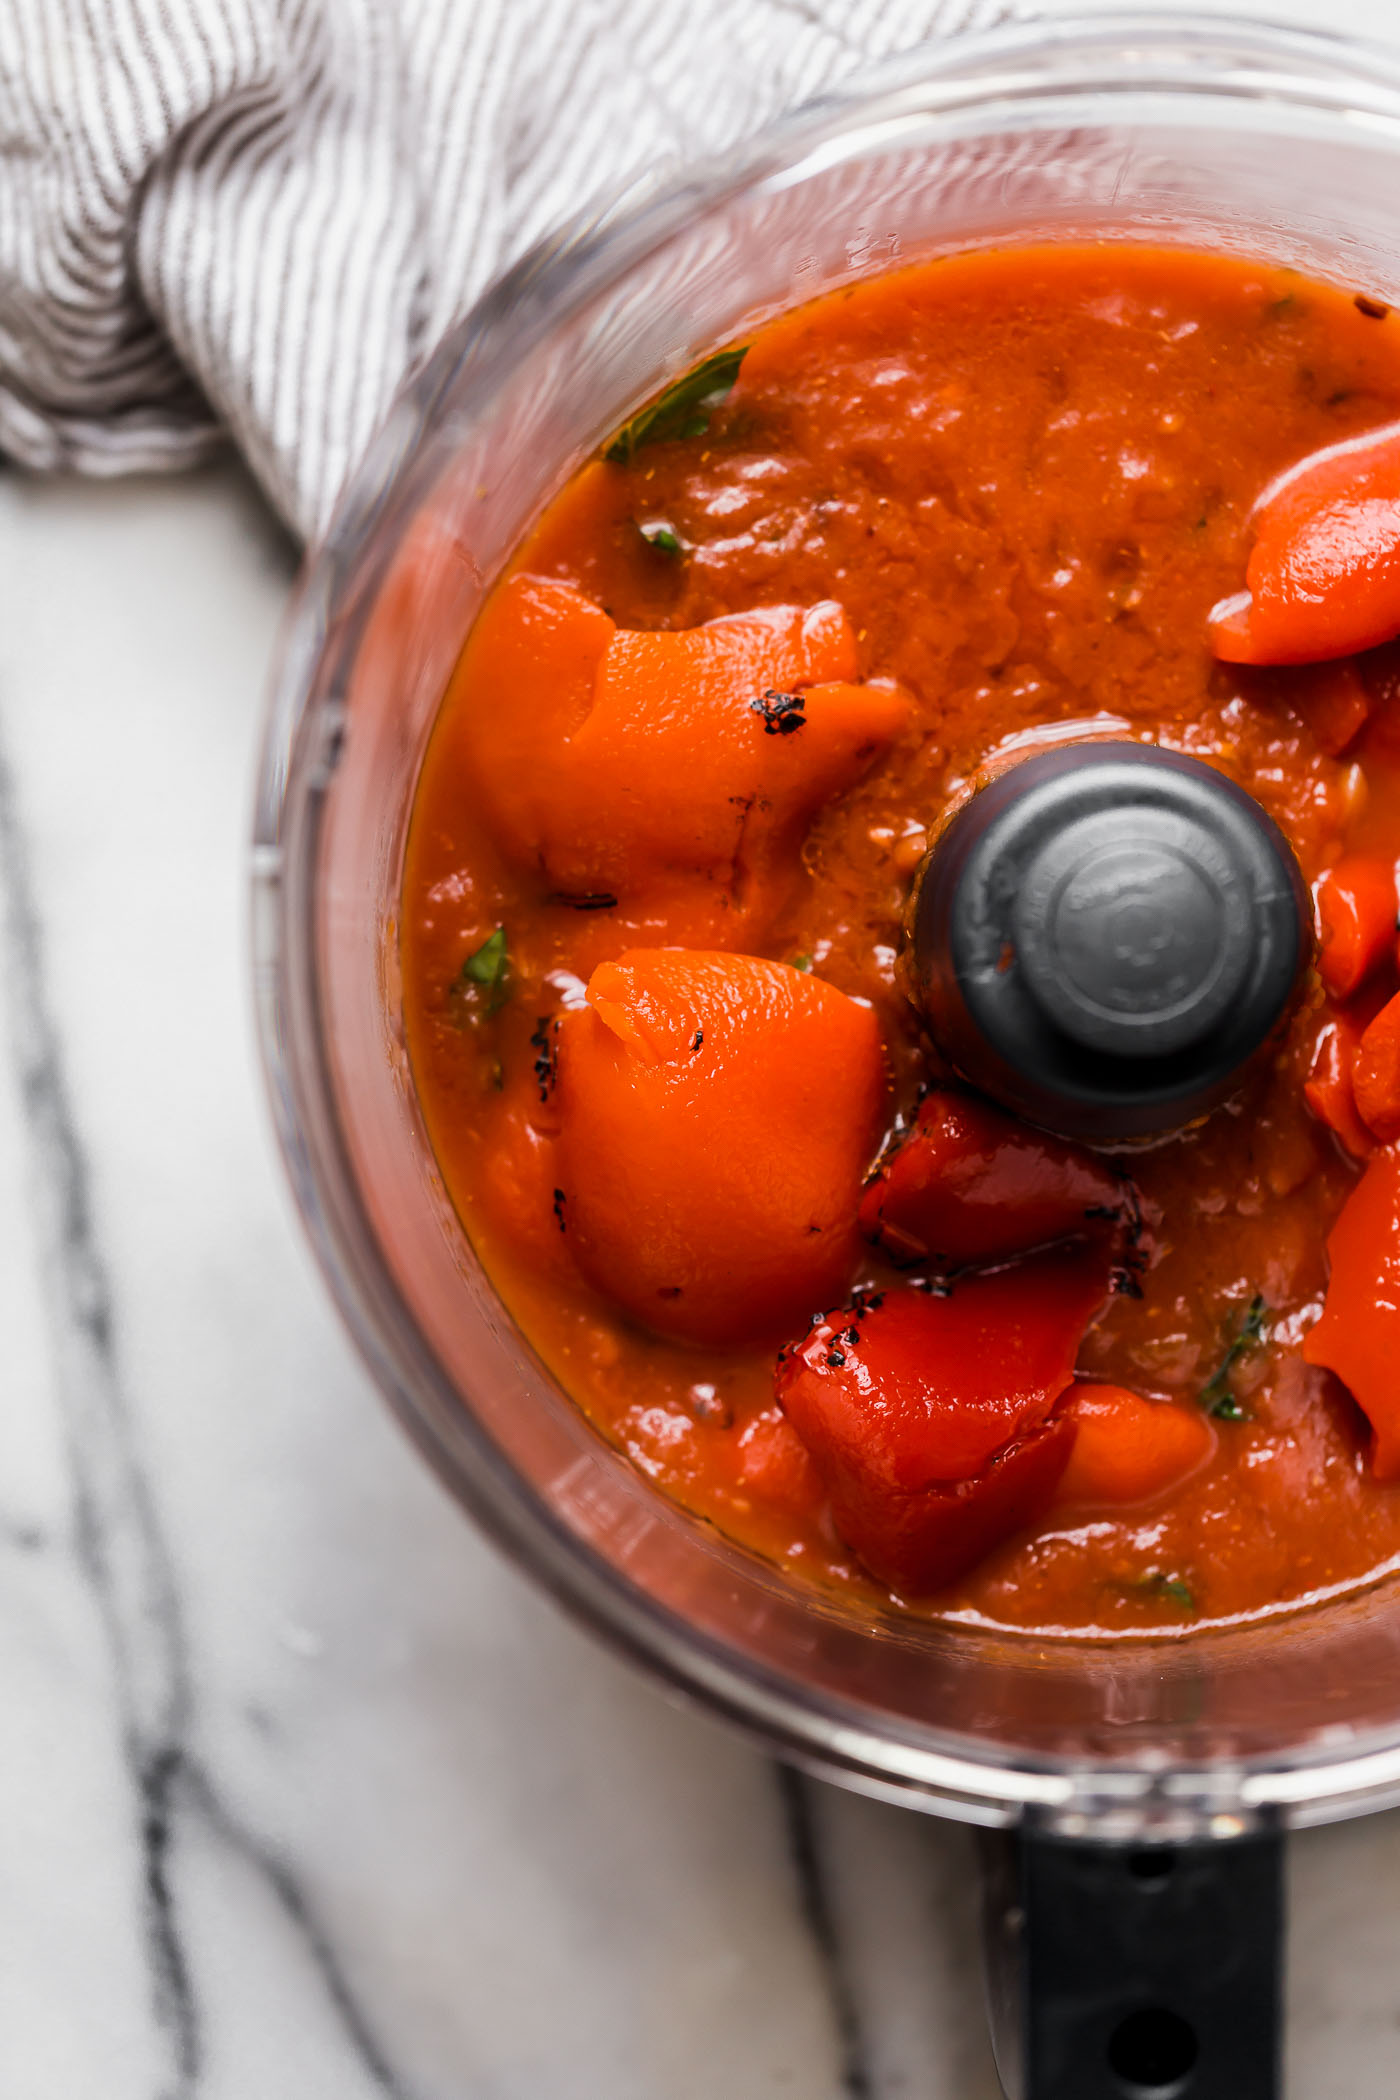 a quick & fresh homemade pasta sauce, this roasted red pepper pomodoro sauce is made with 5-ingredients in less than 10 minutes! #playswellwithbutter #pomodoro #pastasauce #easypastarecipe #healthypastarecipe #homemadepastasauce #easypastasauce #healthypastasauce